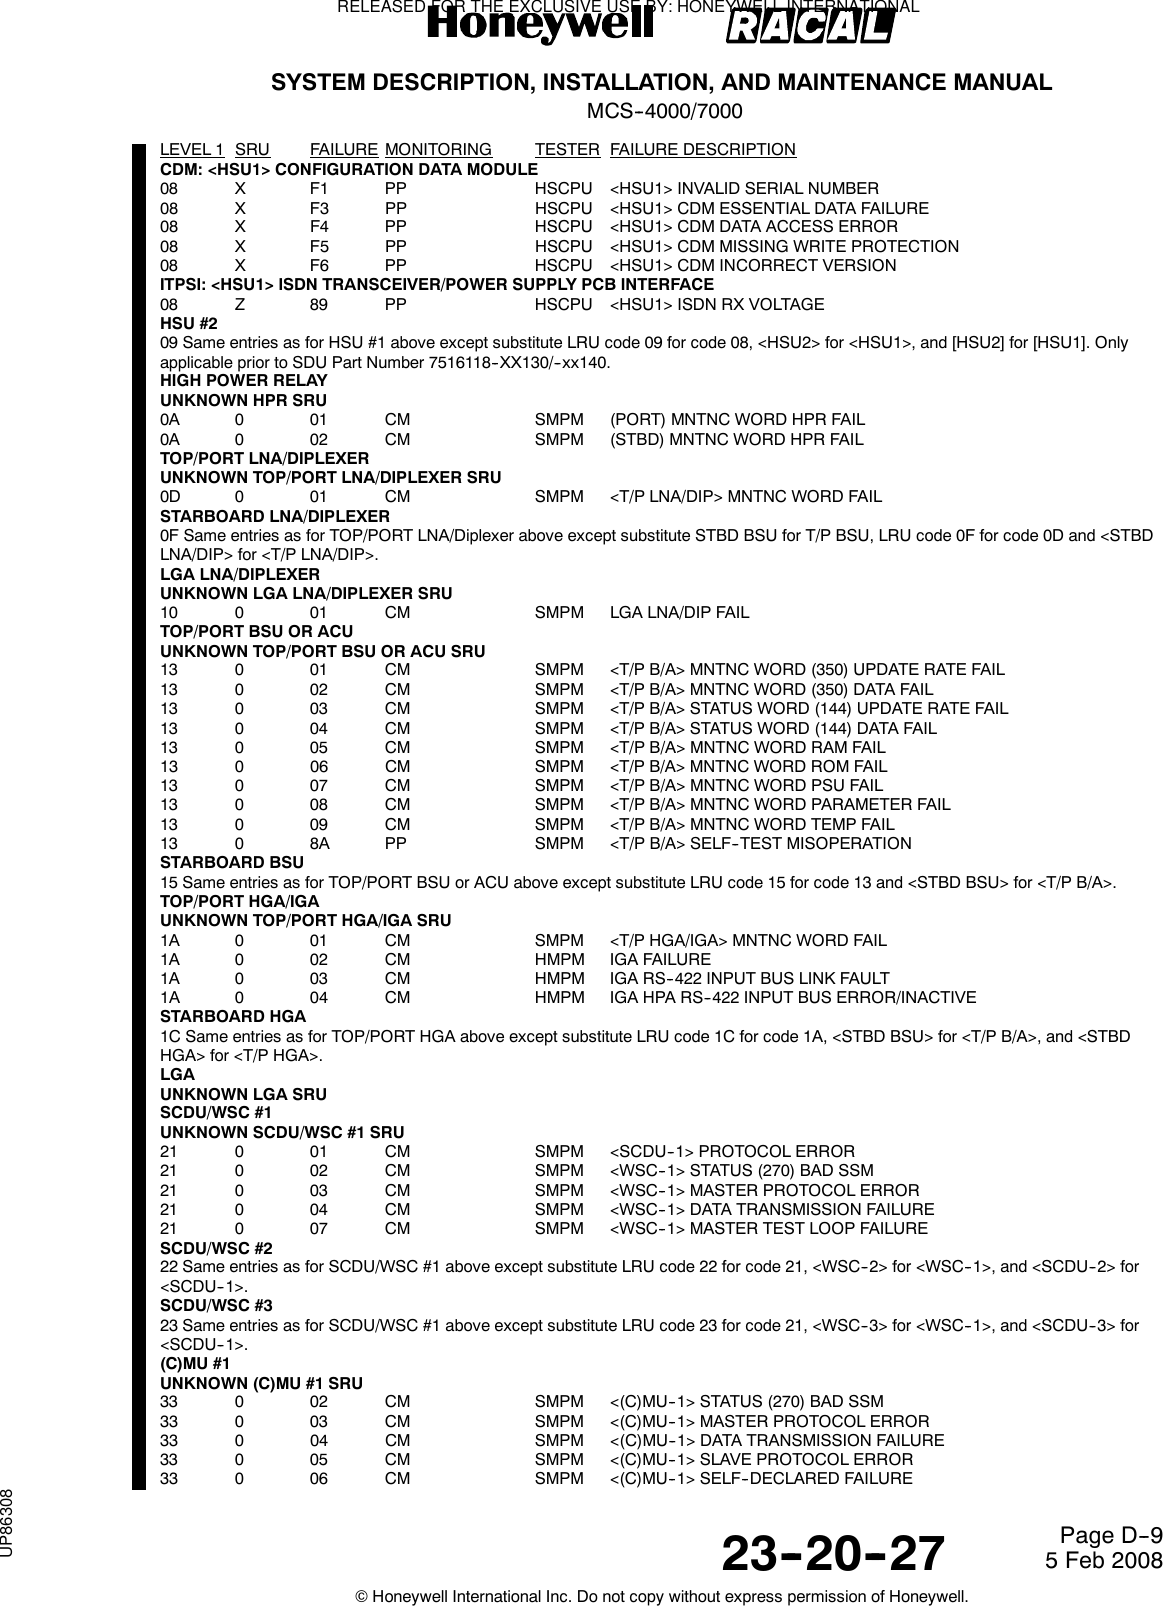 SYSTEM DESCRIPTION, INSTALLATION, AND MAINTENANCE MANUALMCS--4000/700023--20--27 5 Feb 2008©Honeywell International Inc. Do not copy without express permission of Honeywell.Page D--9LEVEL 1 SRU FAILURE MONITORING TESTER FAILURE DESCRIPTIONCDM: &lt;HSU1&gt; CONFIGURATION DATA MODULE08 X F1 PP HSCPU &lt;HSU1&gt; INVALID SERIAL NUMBER08 X F3 PP HSCPU &lt;HSU1&gt; CDM ESSENTIAL DATA FAILURE08 X F4 PP HSCPU &lt;HSU1&gt; CDM DATA ACCESS ERROR08 X F5 PP HSCPU &lt;HSU1&gt; CDM MISSING WRITE PROTECTION08 X F6 PP HSCPU &lt;HSU1&gt; CDM INCORRECT VERSIONITPSI: &lt;HSU1&gt; ISDN TRANSCEIVER/POWER SUPPLY PCB INTERFACE08 Z 89 PP HSCPU &lt;HSU1&gt; ISDN RX VOLTAGEHSU #209 Same entries as for HSU #1 above except substitute LRU code 09 for code 08, &lt;HSU2&gt; for &lt;HSU1&gt;, and [HSU2] for [HSU1]. Onlyapplicable prior to SDU Part Number 7516118--XX130/--xx140.HIGH POWER RELAYUNKNOWN HPR SRU0A 0 01 CM SMPM (PORT) MNTNC WORD HPR FAIL0A 0 02 CM SMPM (STBD) MNTNC WORD HPR FAILTOP/PORT LNA/DIPLEXERUNKNOWN TOP/PORT LNA/DIPLEXER SRU0D 0 01 CM SMPM &lt;T/P LNA/DIP&gt; MNTNC WORD FAILSTARBOARD LNA/DIPLEXER0F Same entries as for TOP/PORT LNA/Diplexer above except substitute STBD BSU for T/P BSU, LRU code 0F for code 0D and &lt;STBDLNA/DIP&gt; for &lt;T/P LNA/DIP&gt;.LGA LNA/DIPLEXERUNKNOWN LGA LNA/DIPLEXER SRU10 0 01 CM SMPM LGA LNA/DIP FAILTOP/PORT BSU OR ACUUNKNOWN TOP/PORT BSU OR ACU SRU13 0 01 CM SMPM &lt;T/P B/A&gt; MNTNC WORD (350) UPDATE RATE FAIL13 0 02 CM SMPM &lt;T/P B/A&gt; MNTNC WORD (350) DATA FAIL13 0 03 CM SMPM &lt;T/P B/A&gt; STATUS WORD (144) UPDATE RATE FAIL13 0 04 CM SMPM &lt;T/P B/A&gt; STATUS WORD (144) DATA FAIL13 0 05 CM SMPM &lt;T/P B/A&gt; MNTNC WORD RAM FAIL13 0 06 CM SMPM &lt;T/P B/A&gt; MNTNC WORD ROM FAIL13 0 07 CM SMPM &lt;T/P B/A&gt; MNTNC WORD PSU FAIL13 0 08 CM SMPM &lt;T/P B/A&gt; MNTNC WORD PARAMETER FAIL13 0 09 CM SMPM &lt;T/P B/A&gt; MNTNC WORD TEMP FAIL13 0 8A PP SMPM &lt;T/P B/A&gt; SELF--TEST MISOPERATIONSTARBOARD BSU15 Same entries as for TOP/PORT BSU or ACU above except substitute LRU code 15 for code 13 and &lt;STBD BSU&gt; for &lt;T/P B/A&gt;.TOP/PORT HGA/IGAUNKNOWN TOP/PORT HGA/IGA SRU1A 0 01 CM SMPM &lt;T/P HGA/IGA&gt; MNTNC WORD FAIL1A 0 02 CM HMPM IGA FAILURE1A 0 03 CM HMPM IGA RS--422 INPUT BUS LINK FAULT1A 0 04 CM HMPM IGA HPA RS--422 INPUT BUS ERROR/INACTIVESTARBOARD HGA1C Same entries as for TOP/PORT HGA above except substitute LRU code 1C for code 1A, &lt;STBD BSU&gt; for &lt;T/P B/A&gt;, and &lt;STBDHGA&gt; for &lt;T/P HGA&gt;.LGAUNKNOWN LGA SRUSCDU/WSC #1UNKNOWN SCDU/WSC #1 SRU21 0 01 CM SMPM &lt;SCDU--1&gt; PROTOCOL ERROR21 0 02 CM SMPM &lt;WSC--1&gt; STATUS (270) BAD SSM21 0 03 CM SMPM &lt;WSC--1&gt; MASTER PROTOCOL ERROR21 0 04 CM SMPM &lt;WSC--1&gt; DATA TRANSMISSION FAILURE21 0 07 CM SMPM &lt;WSC--1&gt; MASTER TEST LOOP FAILURESCDU/WSC #222 Same entries as for SCDU/WSC #1 above except substitute LRU code 22 for code 21, &lt;WSC--2&gt; for &lt;WSC--1&gt;, and &lt;SCDU--2&gt; for&lt;SCDU--1&gt;.SCDU/WSC #323 Same entries as for SCDU/WSC #1 above except substitute LRU code 23 for code 21, &lt;WSC--3&gt; for &lt;WSC--1&gt;, and &lt;SCDU--3&gt; for&lt;SCDU--1&gt;.(C)MU #1UNKNOWN (C)MU #1 SRU33 0 02 CM SMPM &lt;(C)MU--1&gt; STATUS (270) BAD SSM33 0 03 CM SMPM &lt;(C)MU--1&gt; MASTER PROTOCOL ERROR33 0 04 CM SMPM &lt;(C)MU--1&gt; DATA TRANSMISSION FAILURE33 0 05 CM SMPM &lt;(C)MU--1&gt; SLAVE PROTOCOL ERROR33 0 06 CM SMPM &lt;(C)MU--1&gt; SELF--DECLARED FAILURERELEASED FOR THE EXCLUSIVE USE BY: HONEYWELL INTERNATIONALUP86308